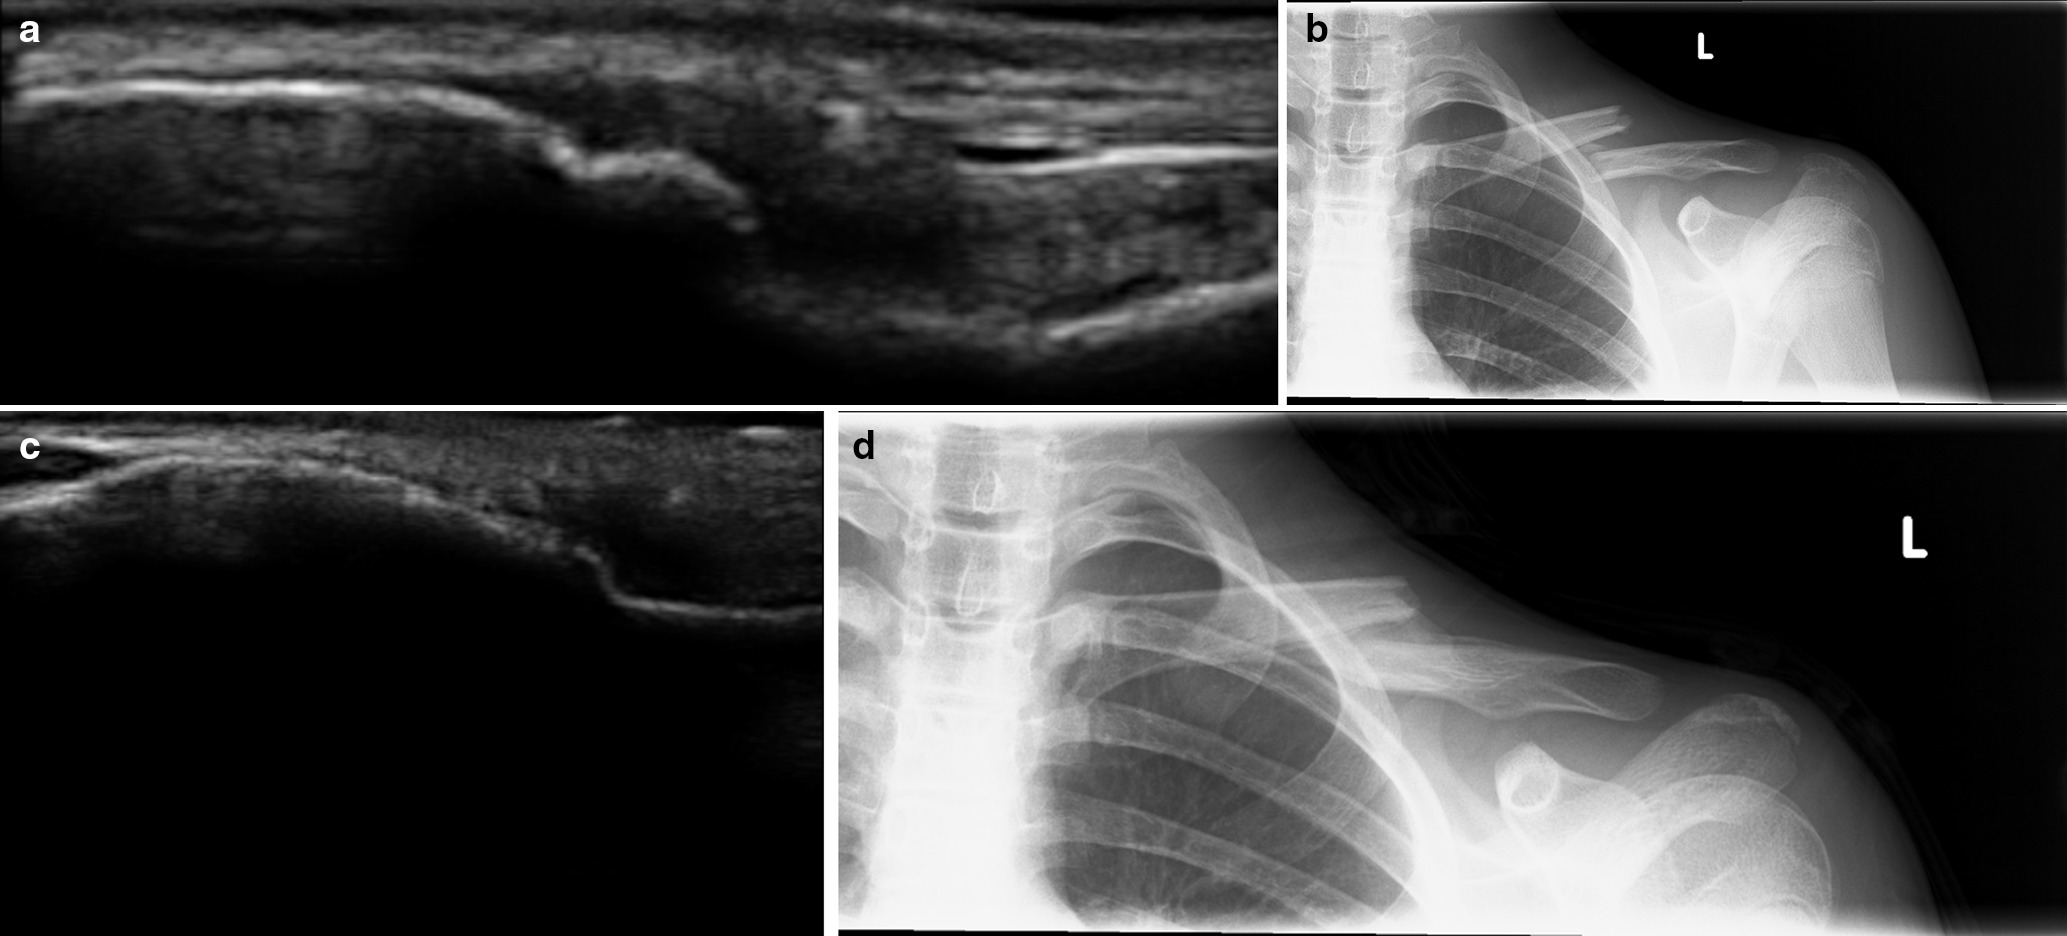 Fig. 6 
            Remodelling of bridging callus on ultrasound as seen in an 18-year-old male. a) Six-week sonographic bridging callus at fracture site; b) six-week anteroposterior radiograph showing minimal callus formation; c) 12-week ultrasound scan showing remodelling of sonographic bridging callus; d) 12-week anteroposterior radiograph with bridging callus now evident.
          